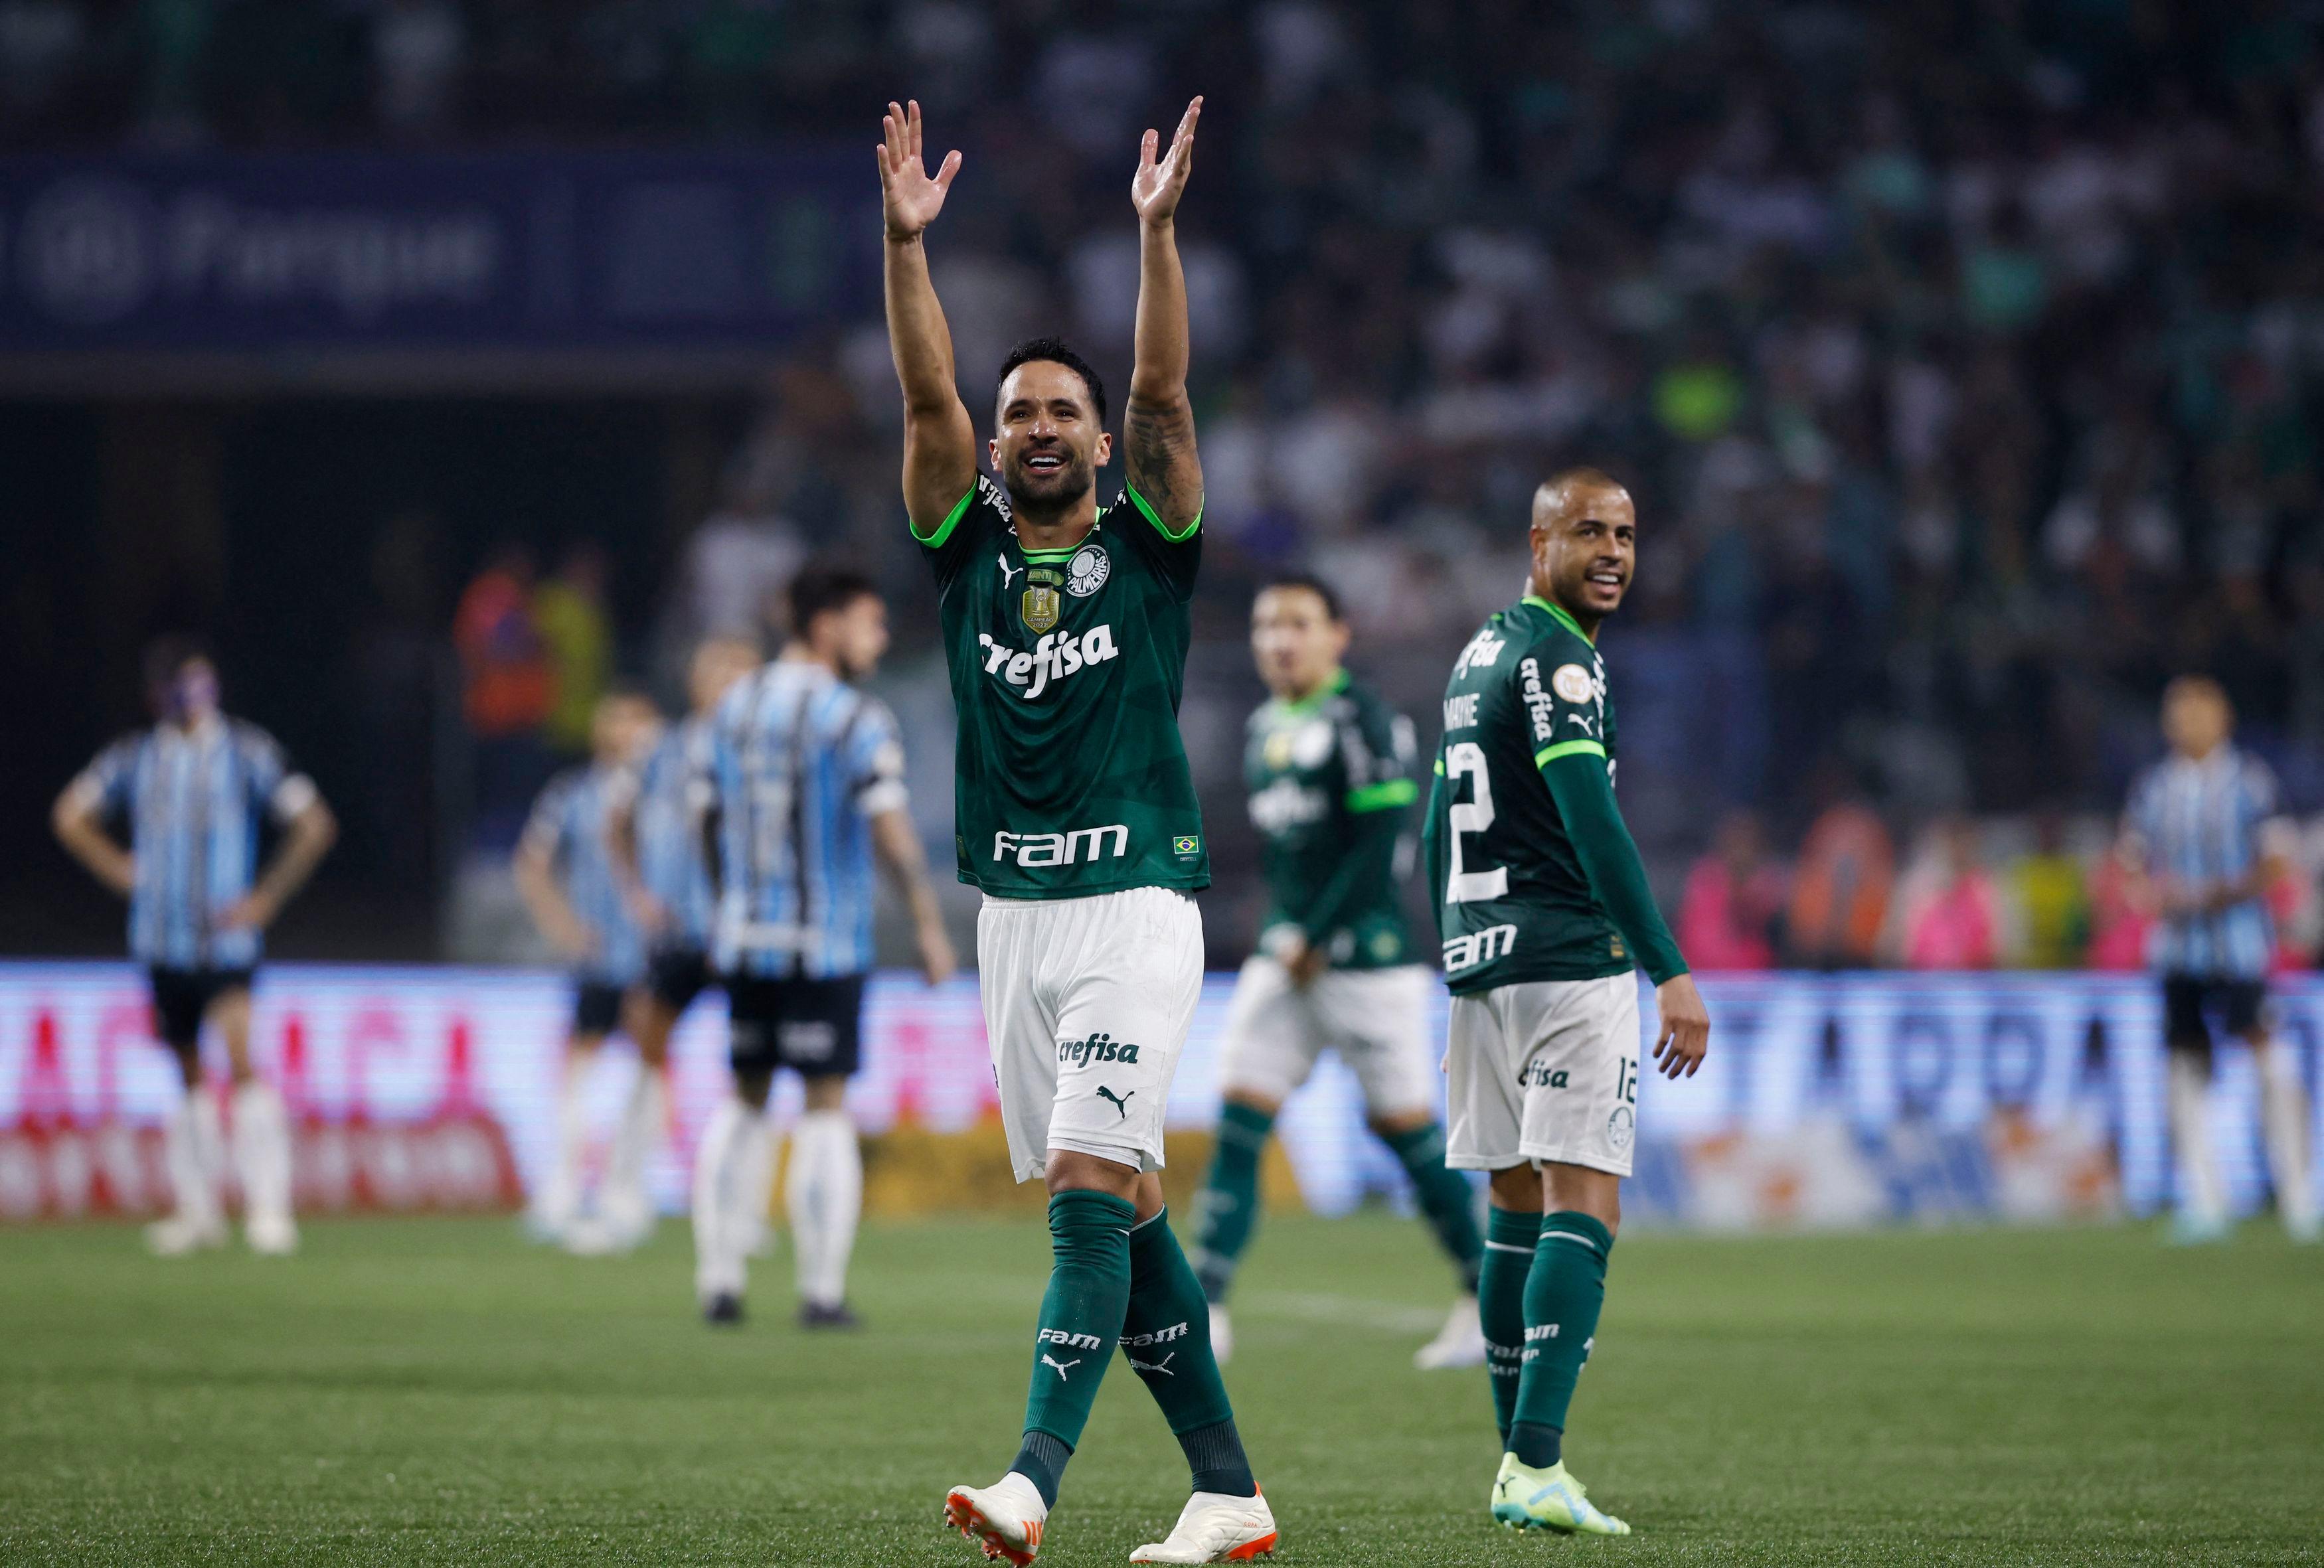 Players of Gremio during the game between Palmeiras and Gremio for the 34th  round of the Brazilian league, known locally as Campeonato Brasiliero. The  game took place at the Allianz Parque in